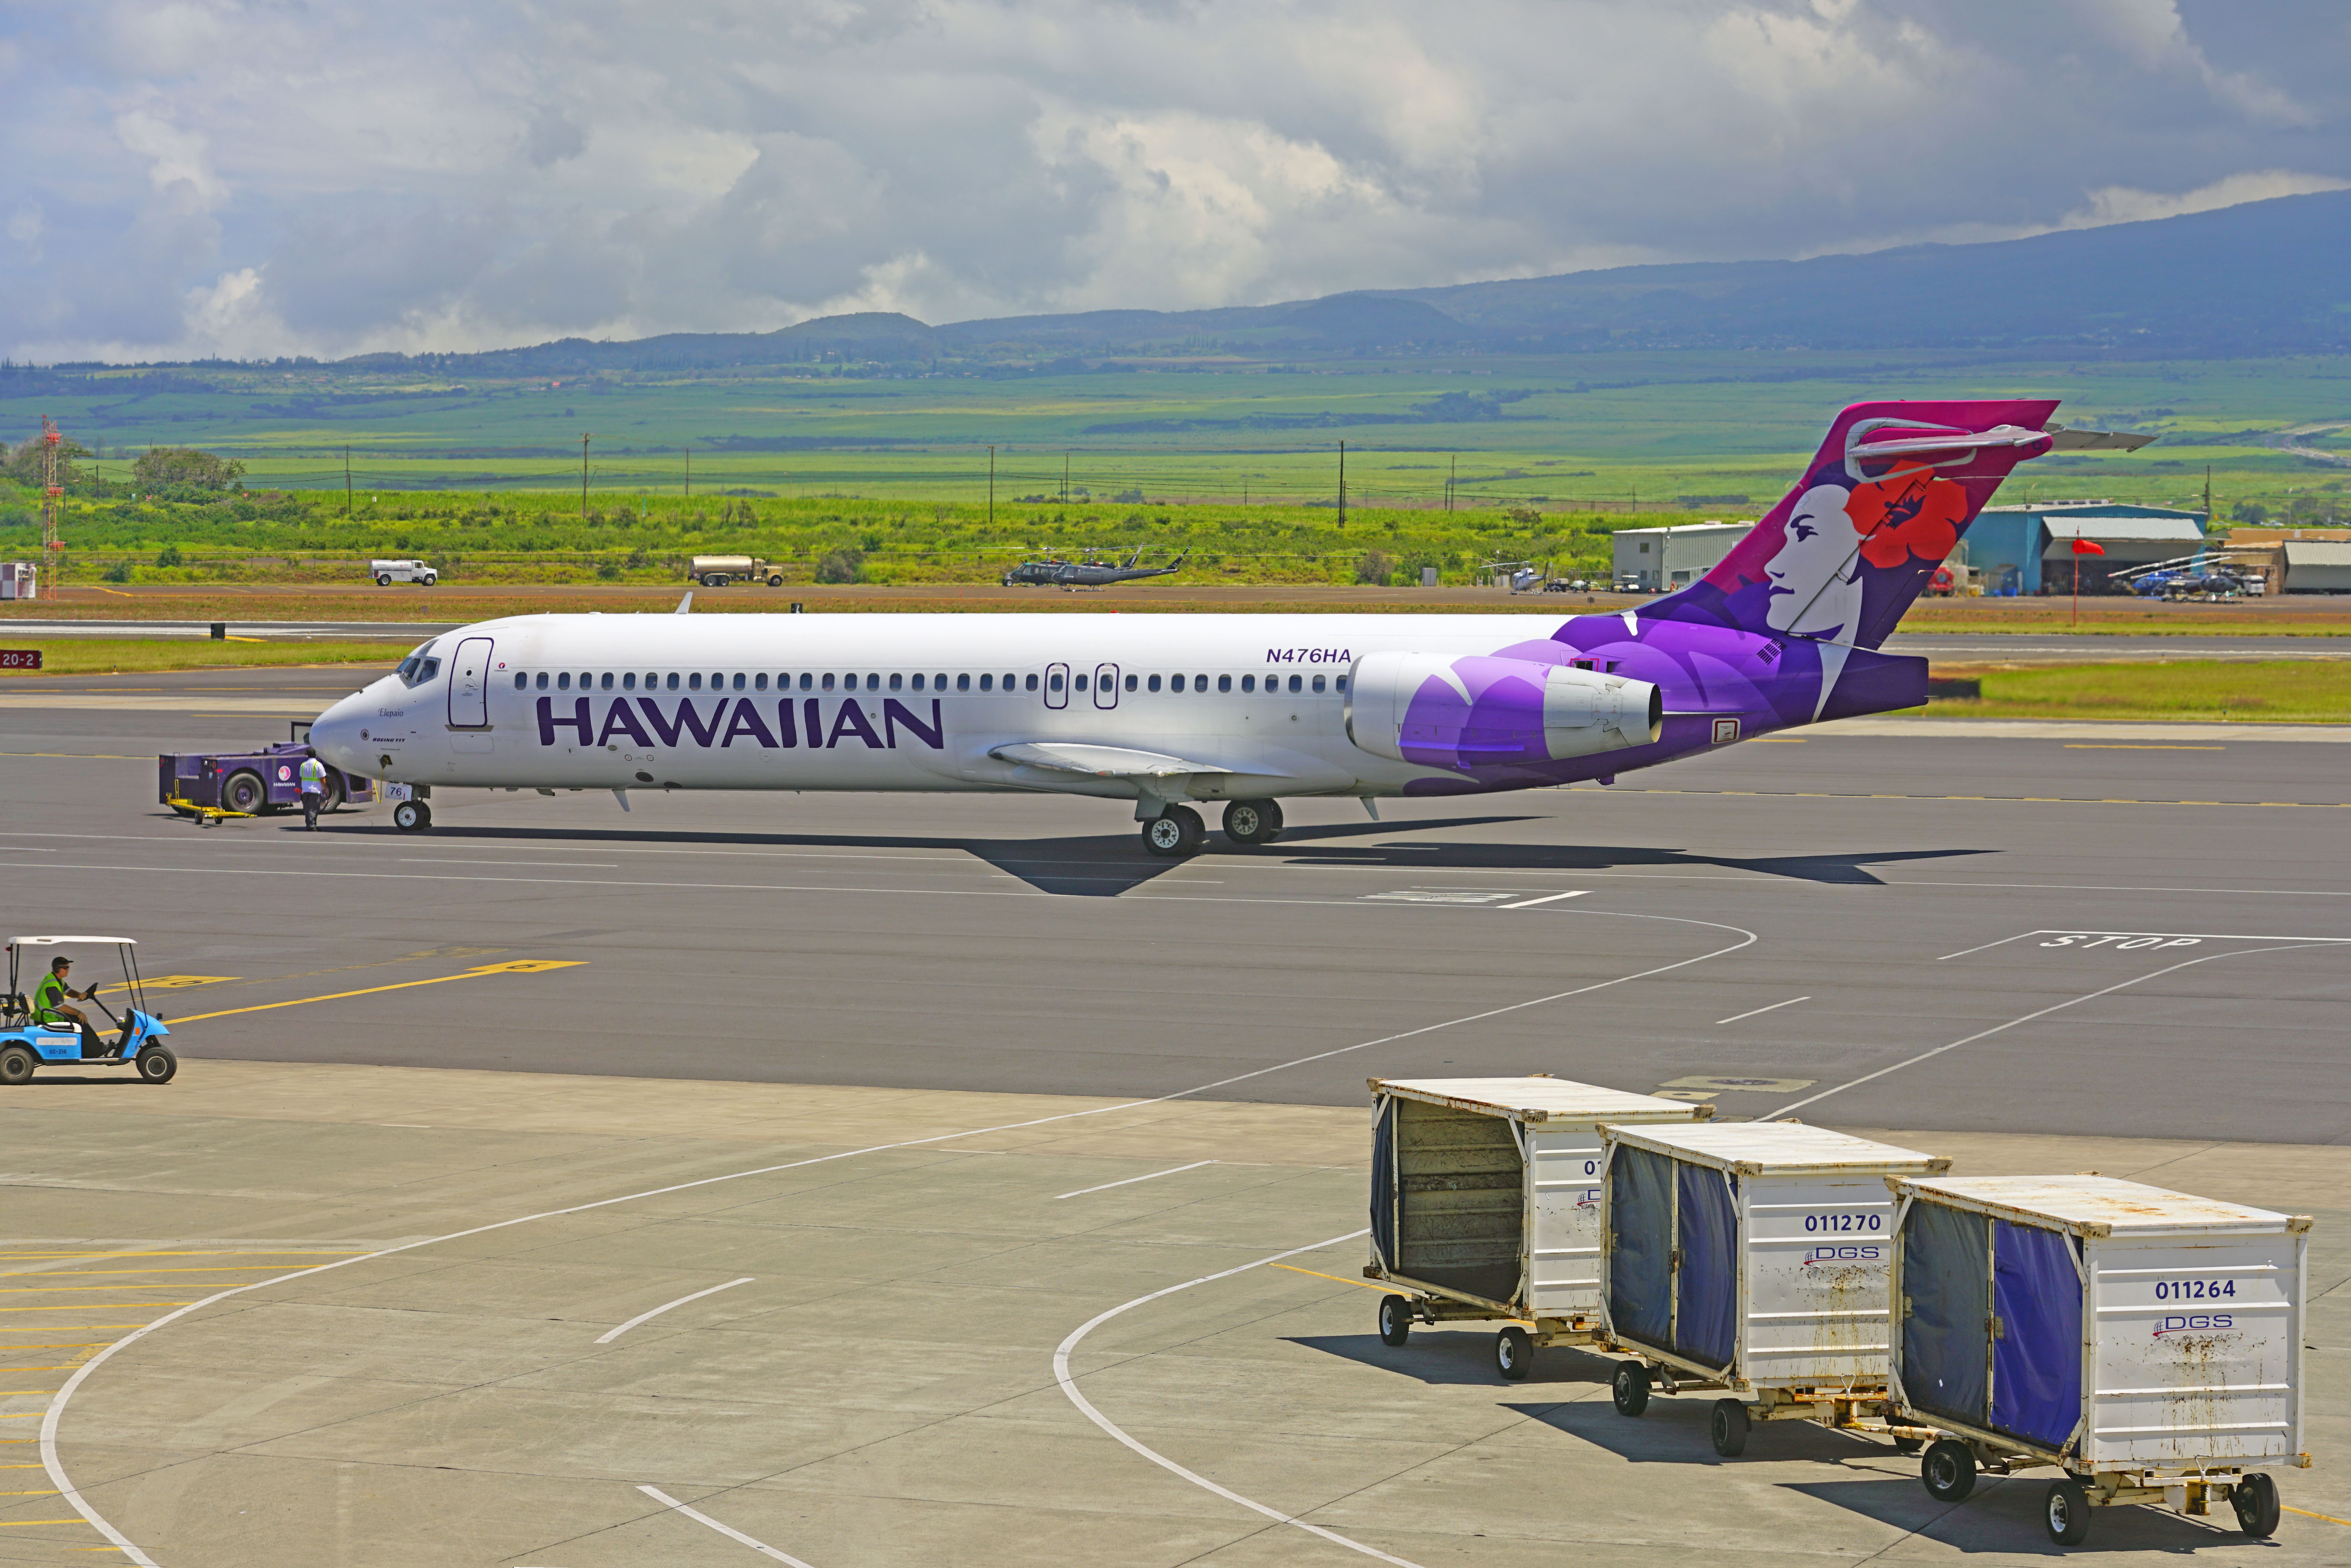 A Hawaiian Airlines Boeing 717 parked on an airport apron.